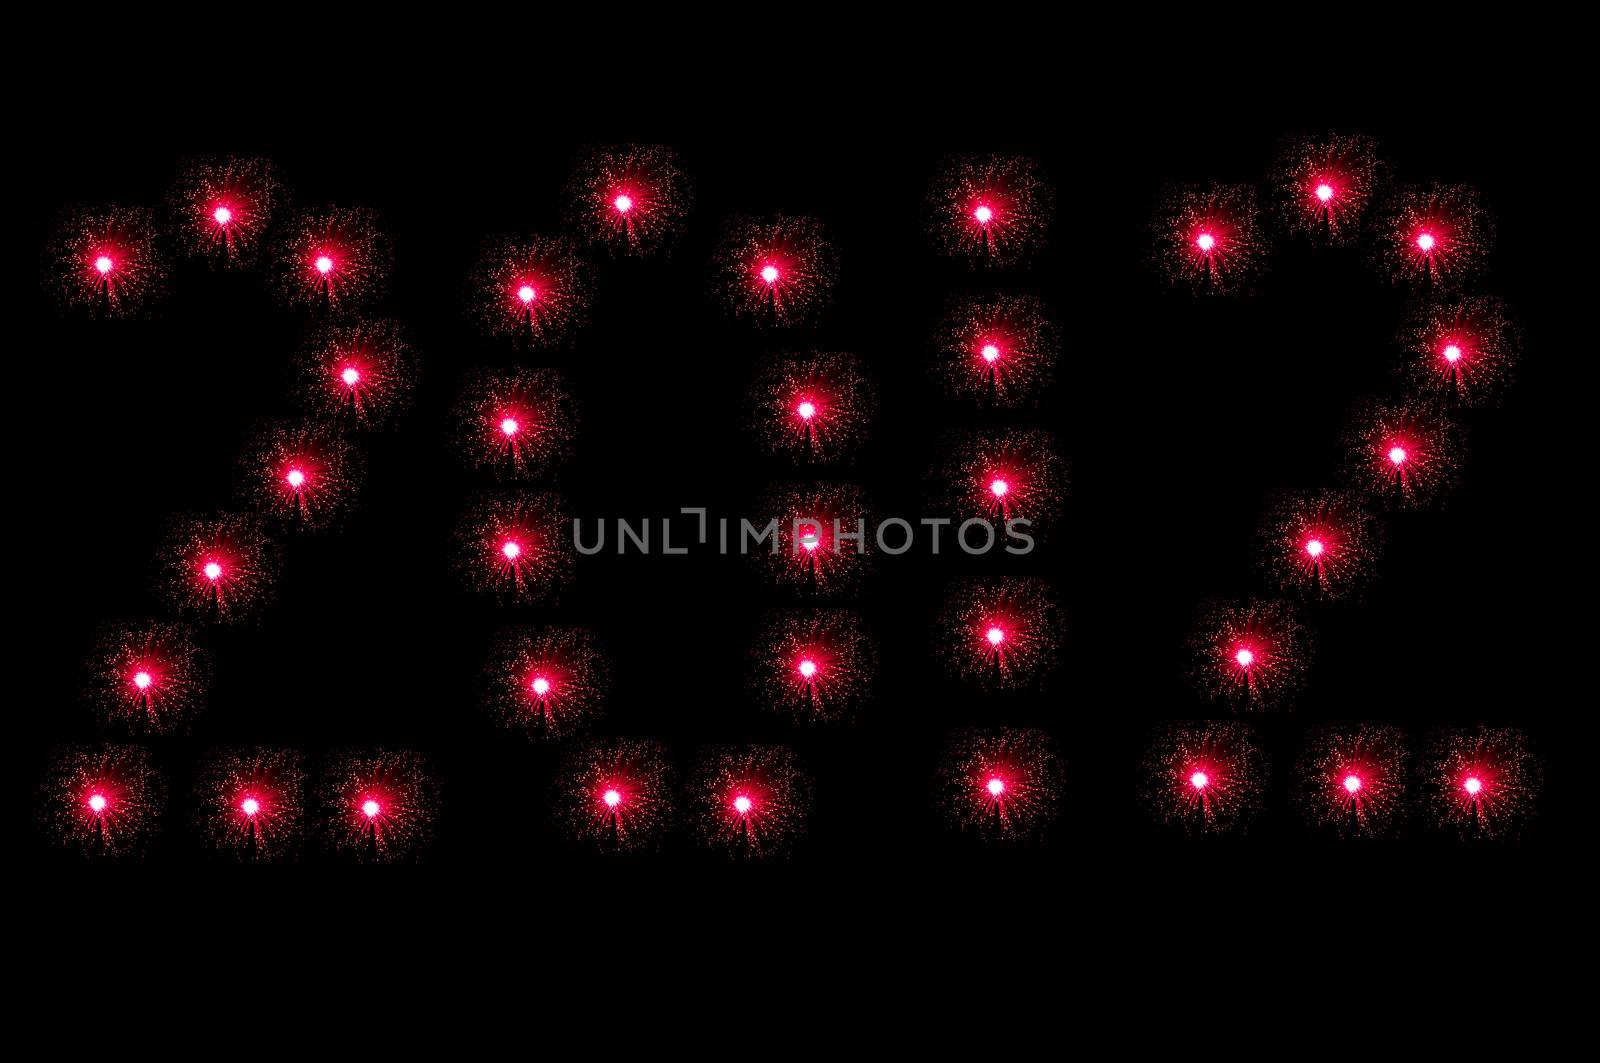 Many small illuminated red fibre optic lamps arranged on black background to spell the number 2012